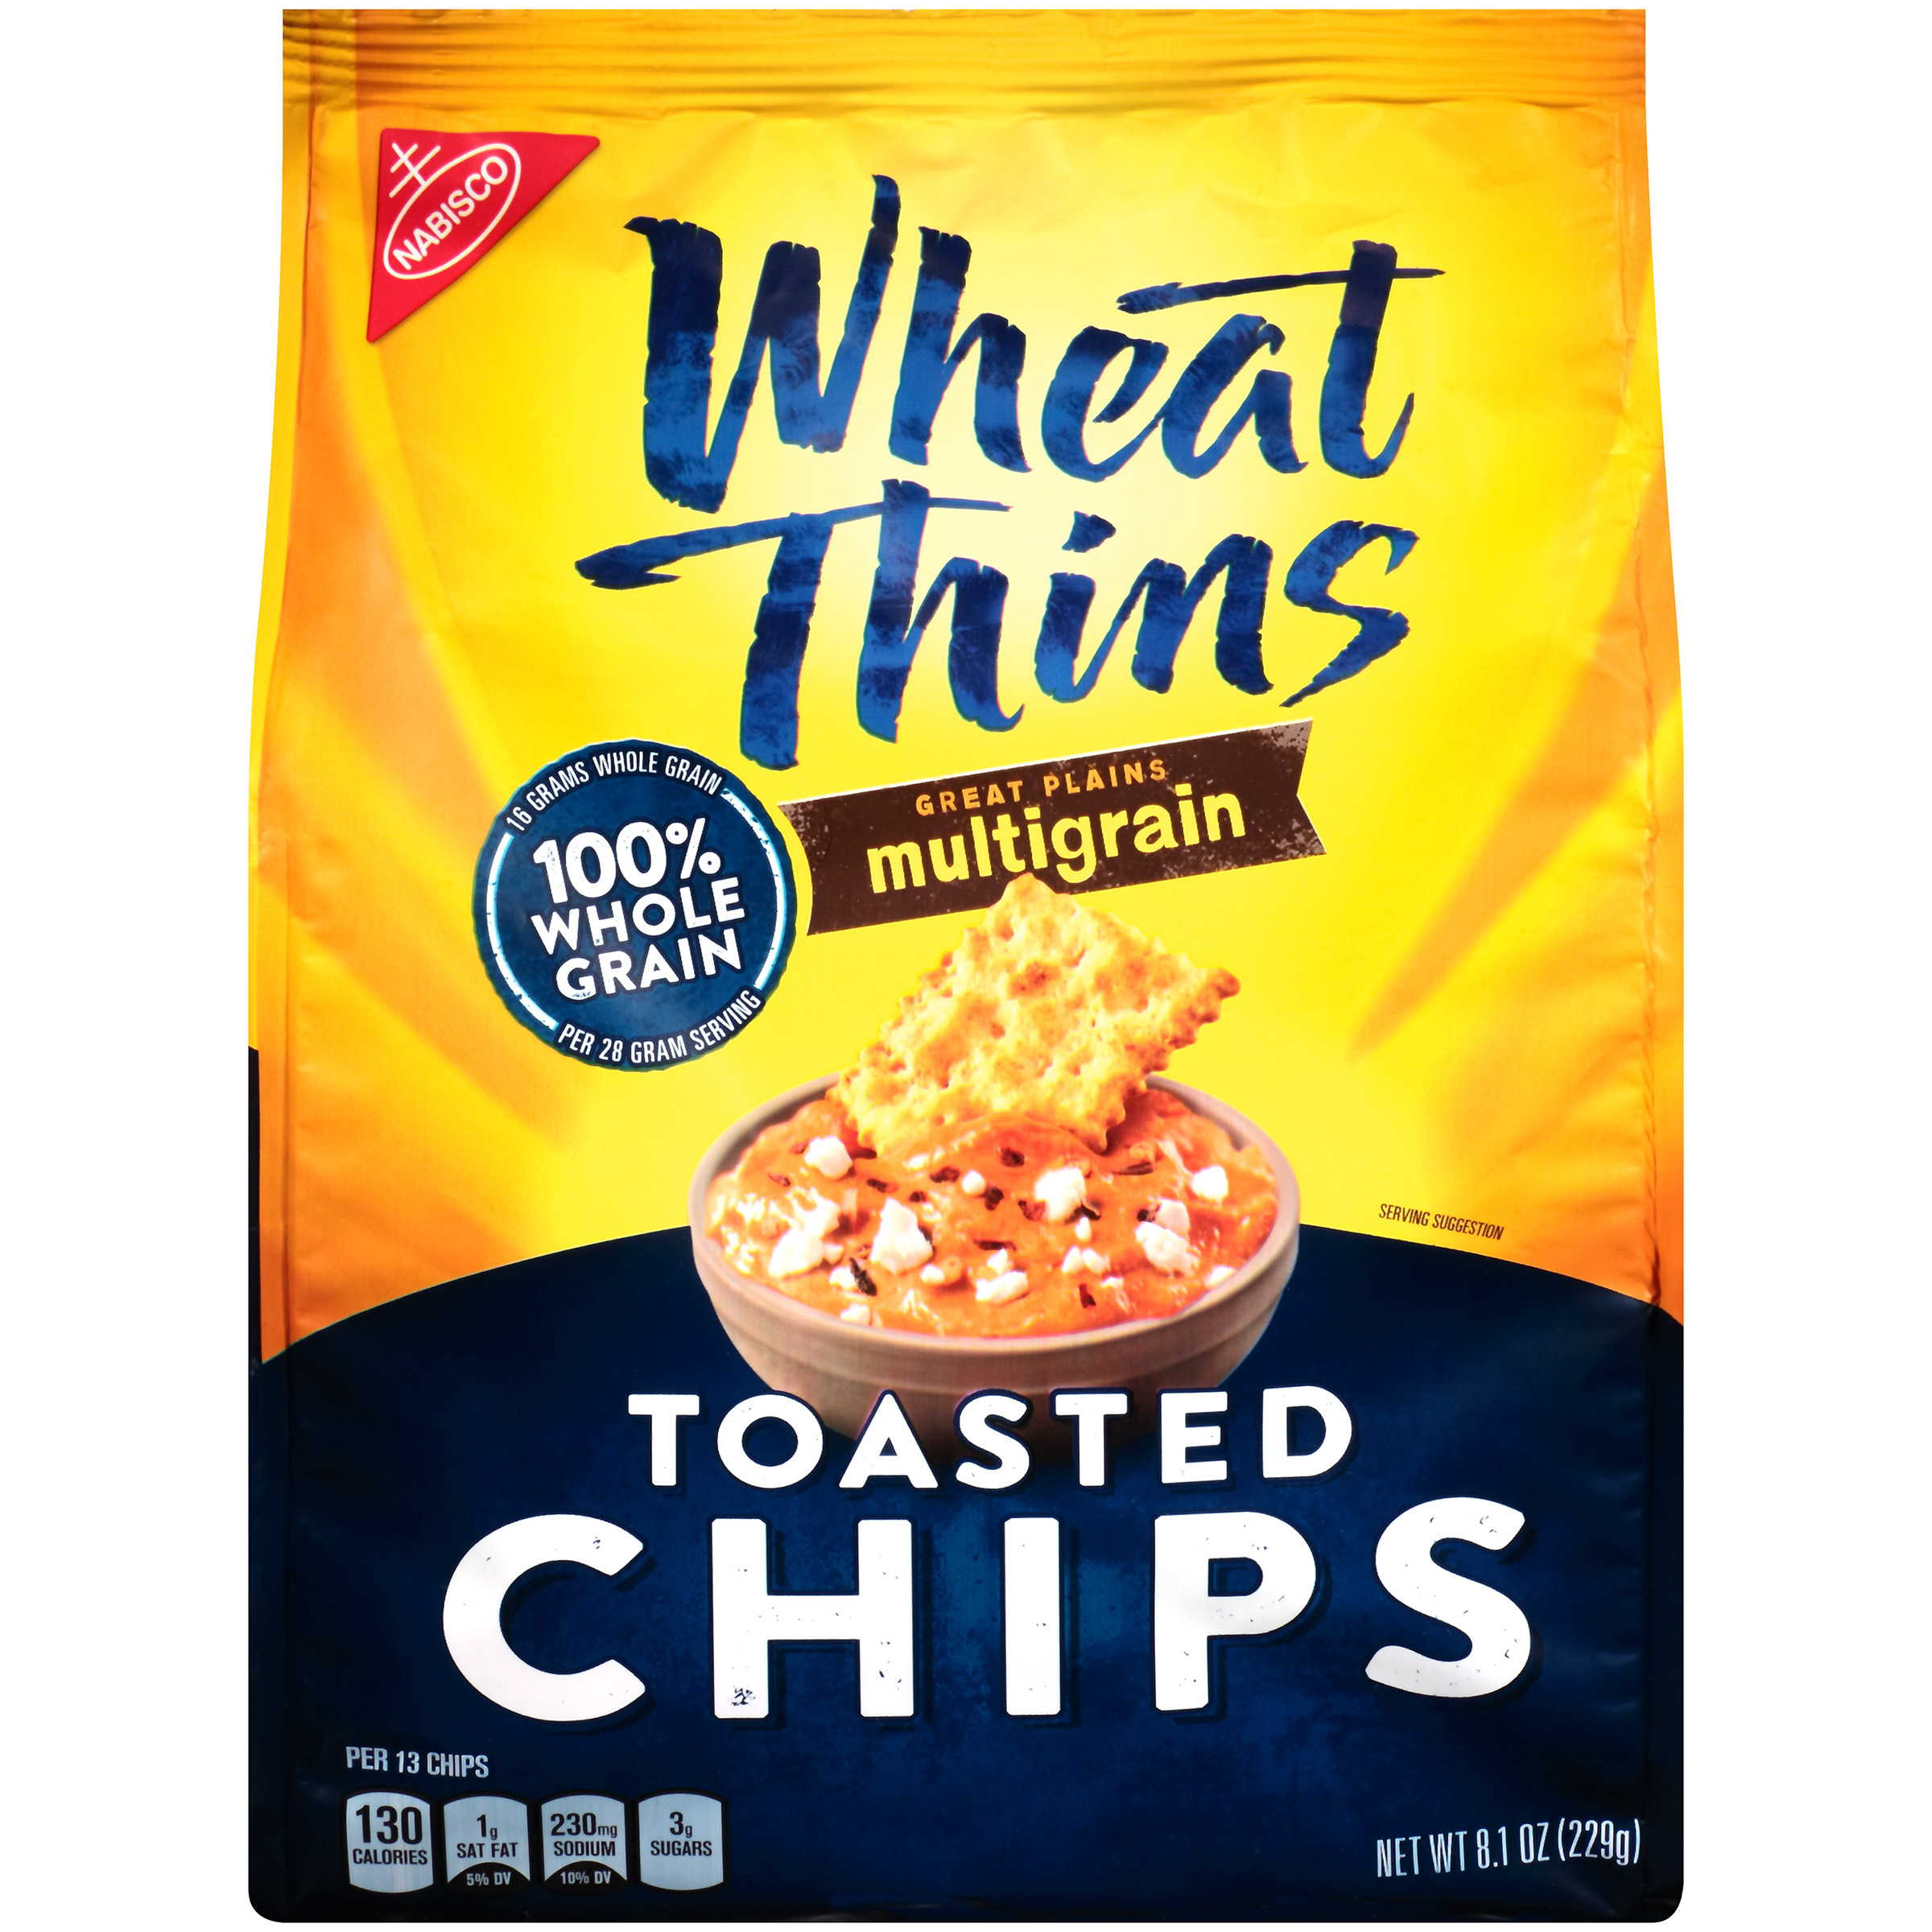 Nabisco Snack Crackers
 Nabisco Wheat Thins Toasted Chips Great Plains Multigrain